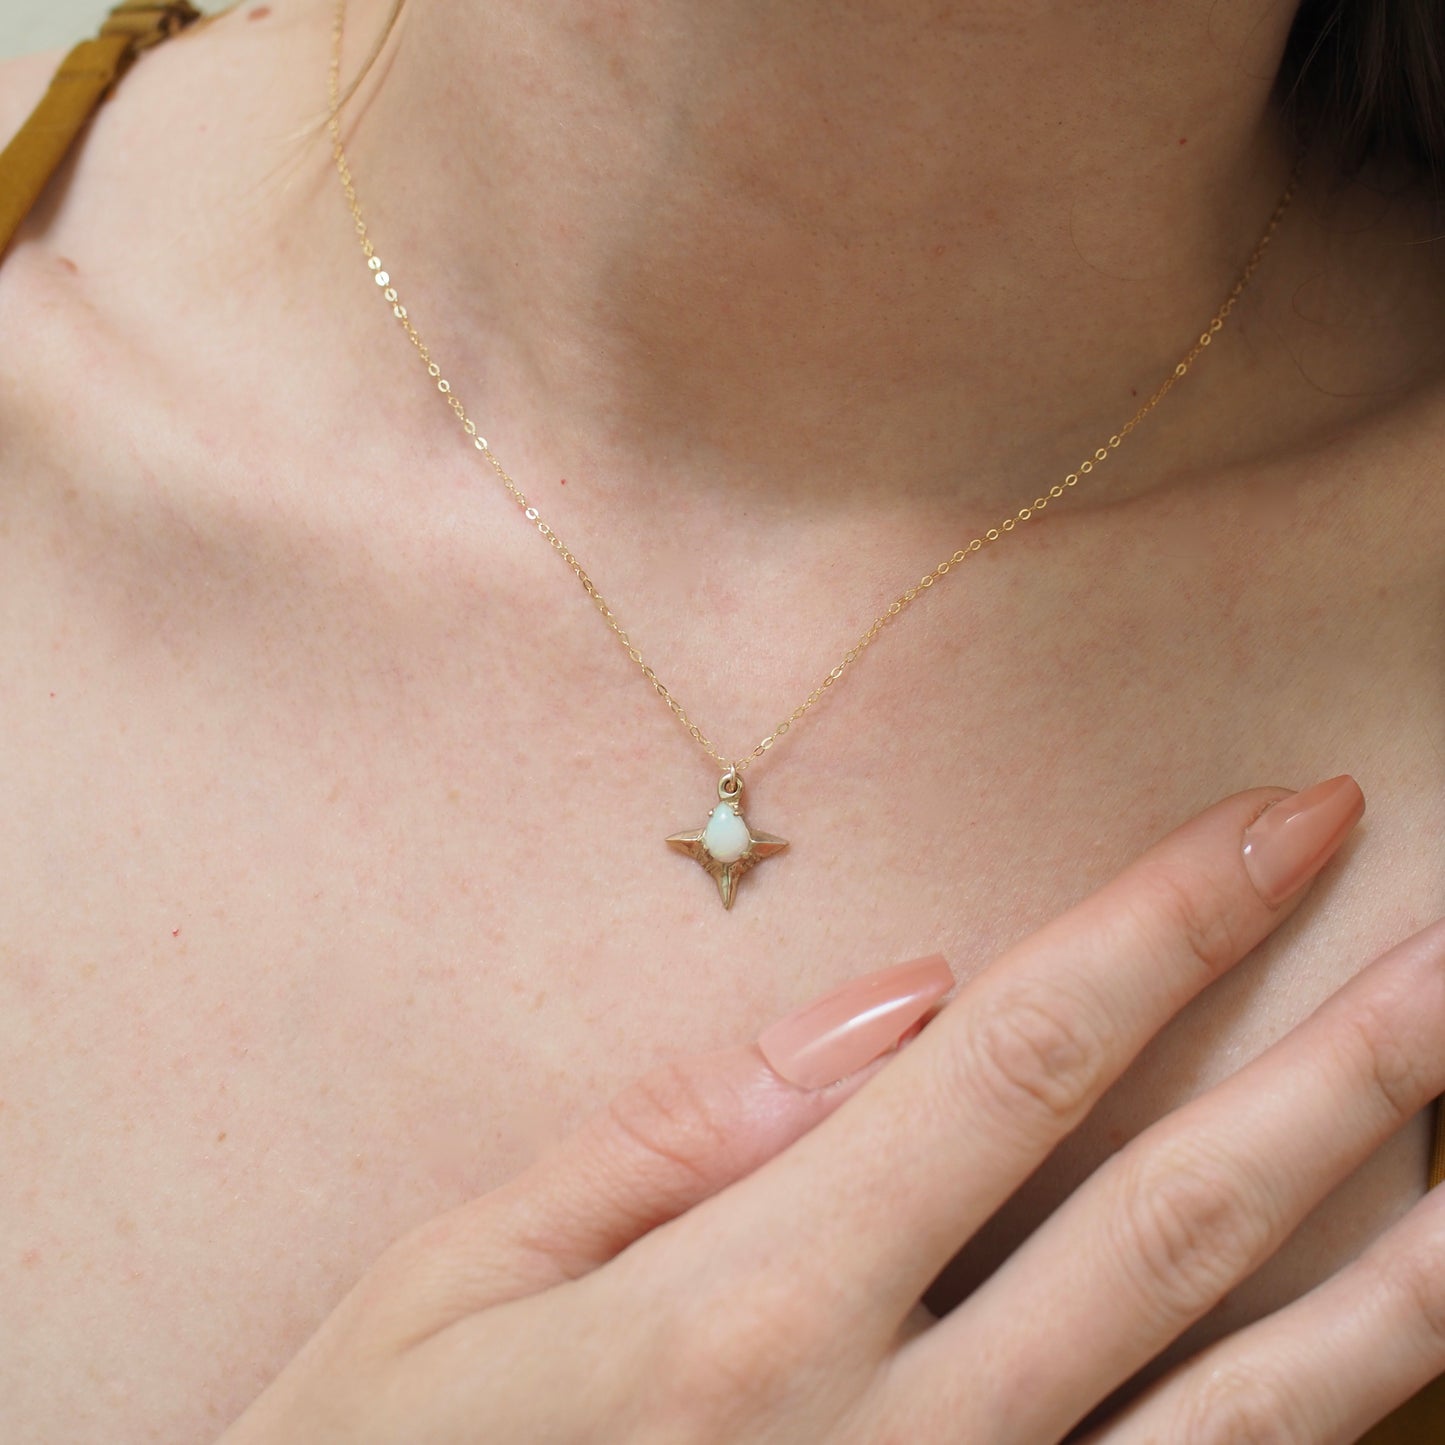 Teardrop shaped lab grown opal set in a four point star in gold tone bronze and sterling silver handmade by Iron Oxide Designs, shown on a model for scale